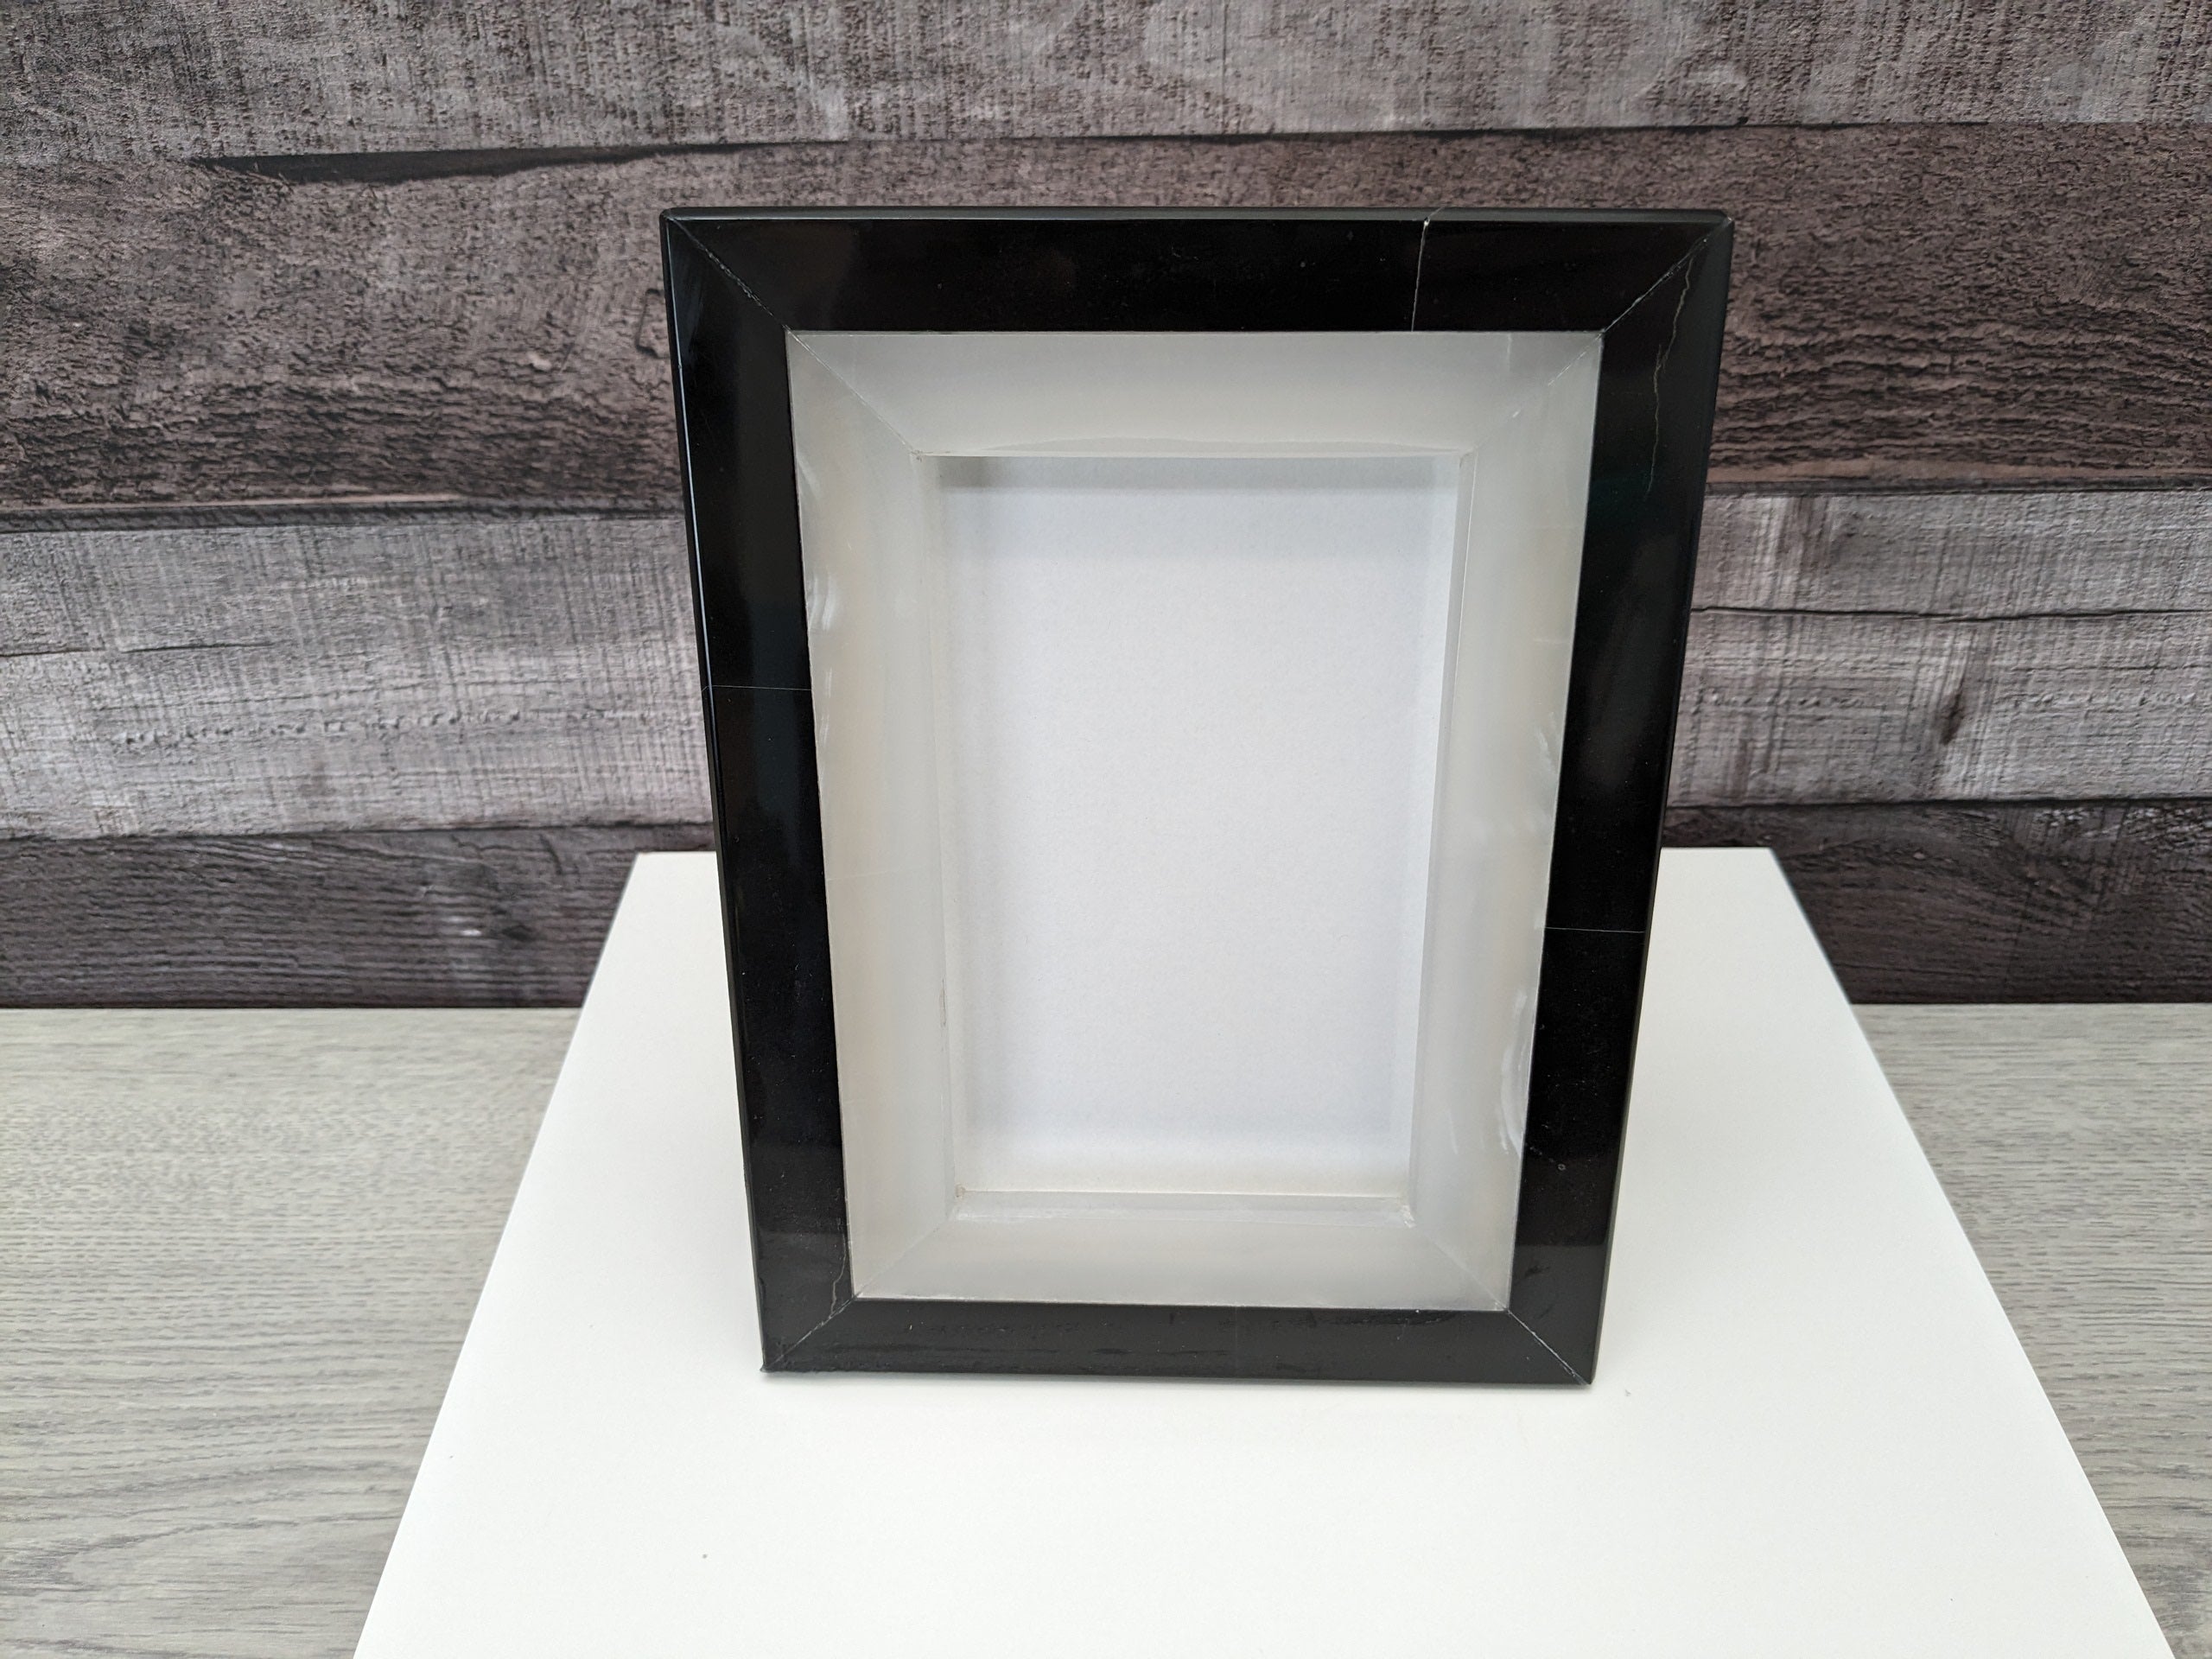 Black and Beige Onyx Stone Frame with Glass Cover. Handmade in Mexico. We package and ship from the USA. Buy now at www.felipeandgrace.com.